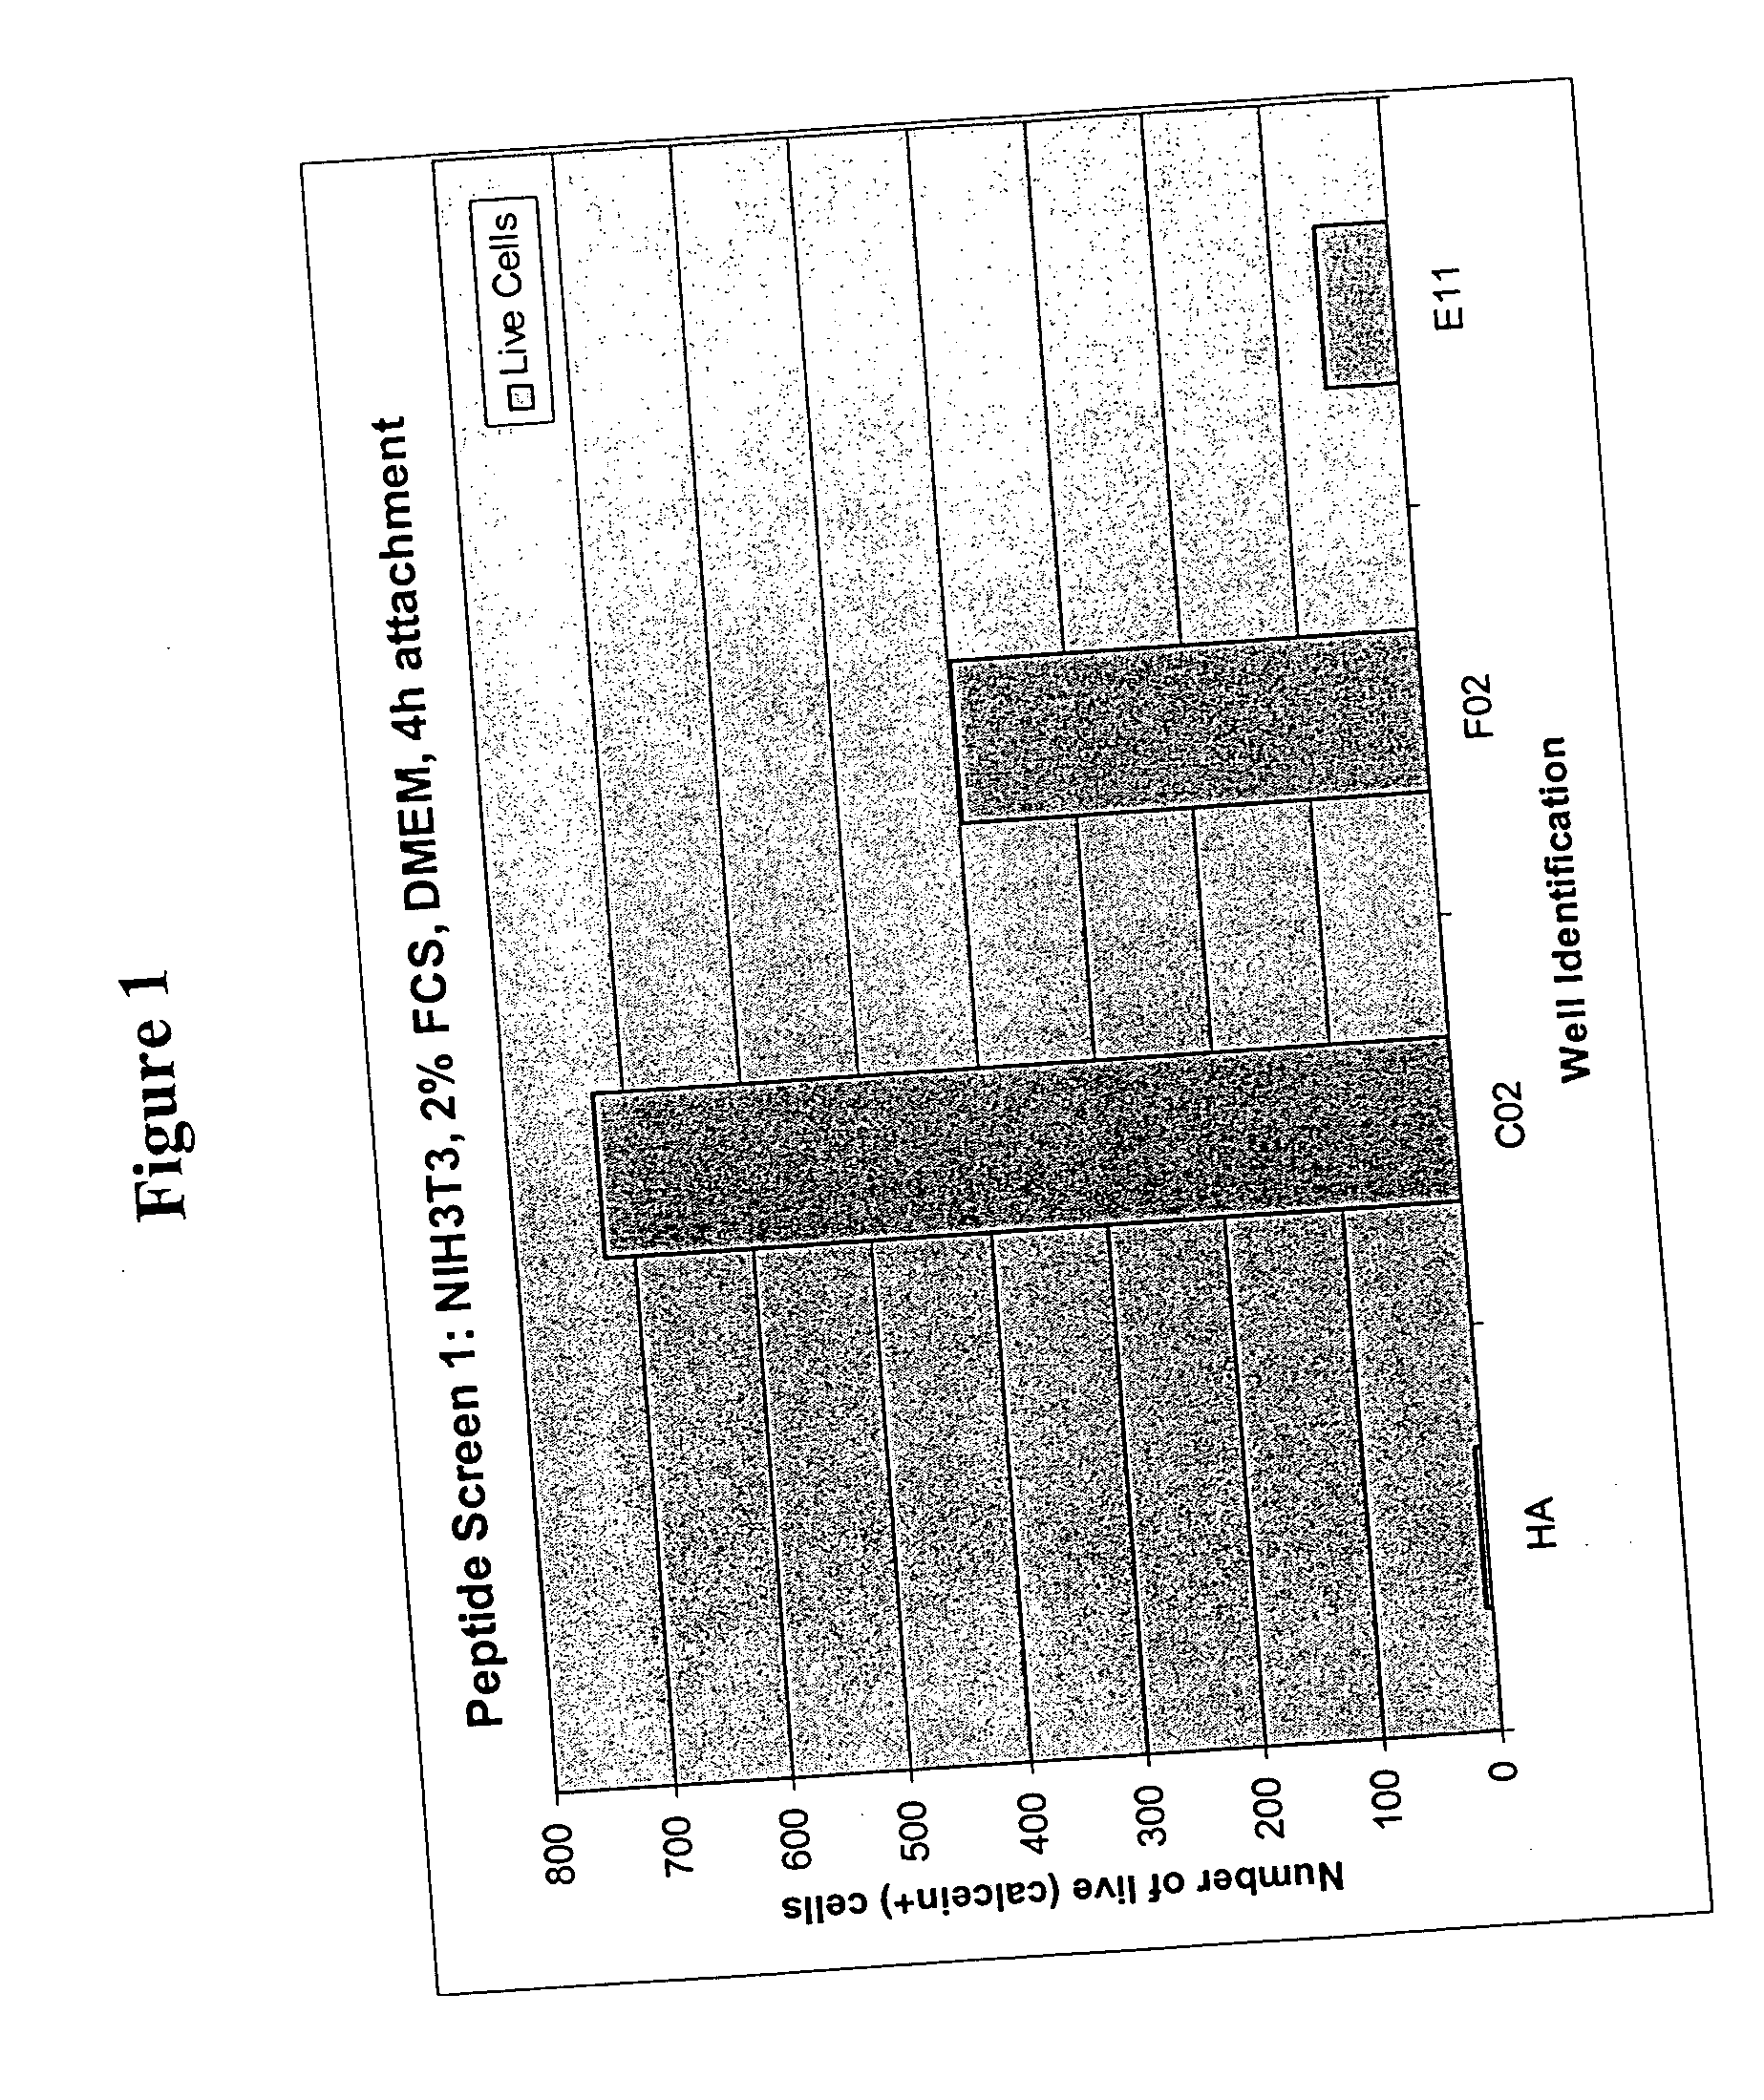 Peptides for enhanced cell attachment and growth